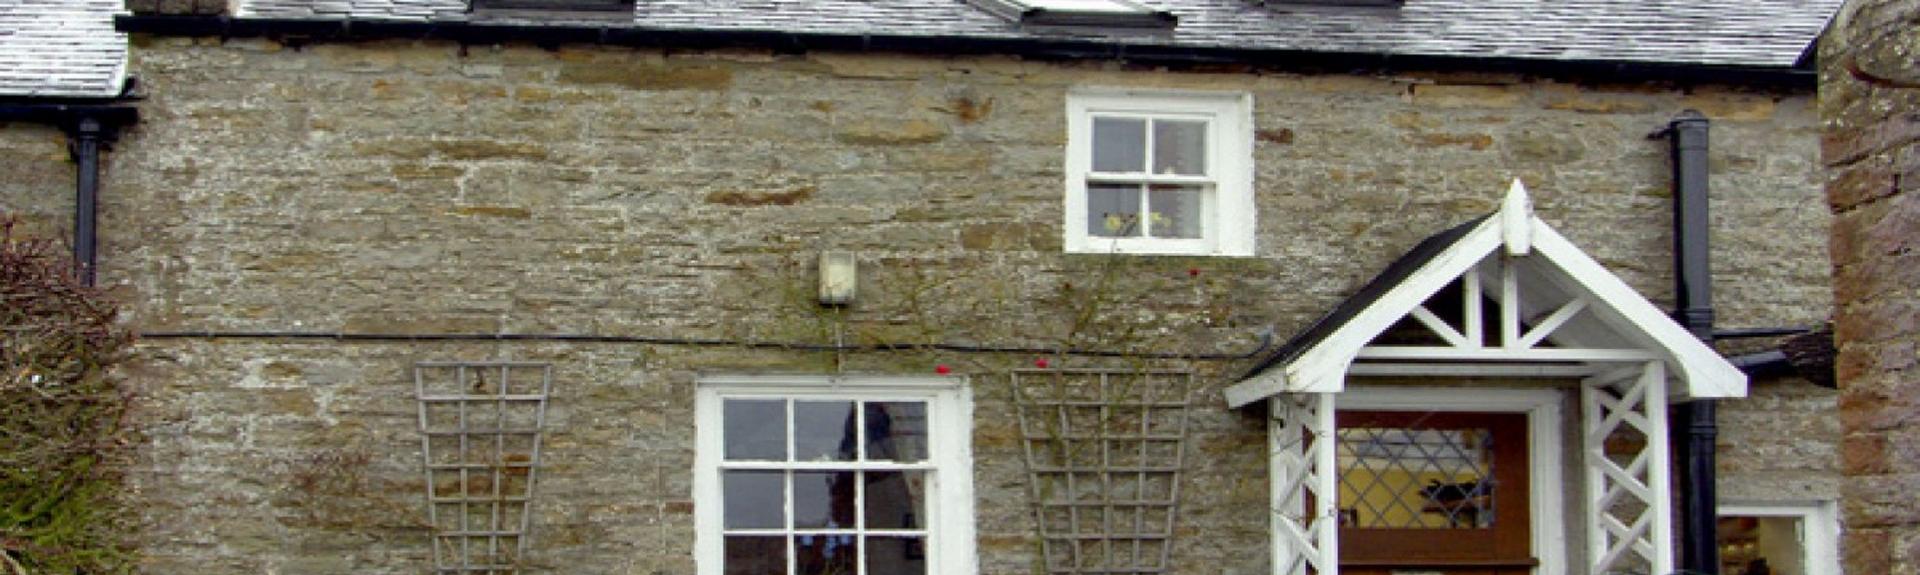 A terraced stone cottage with a low wall around the front garden